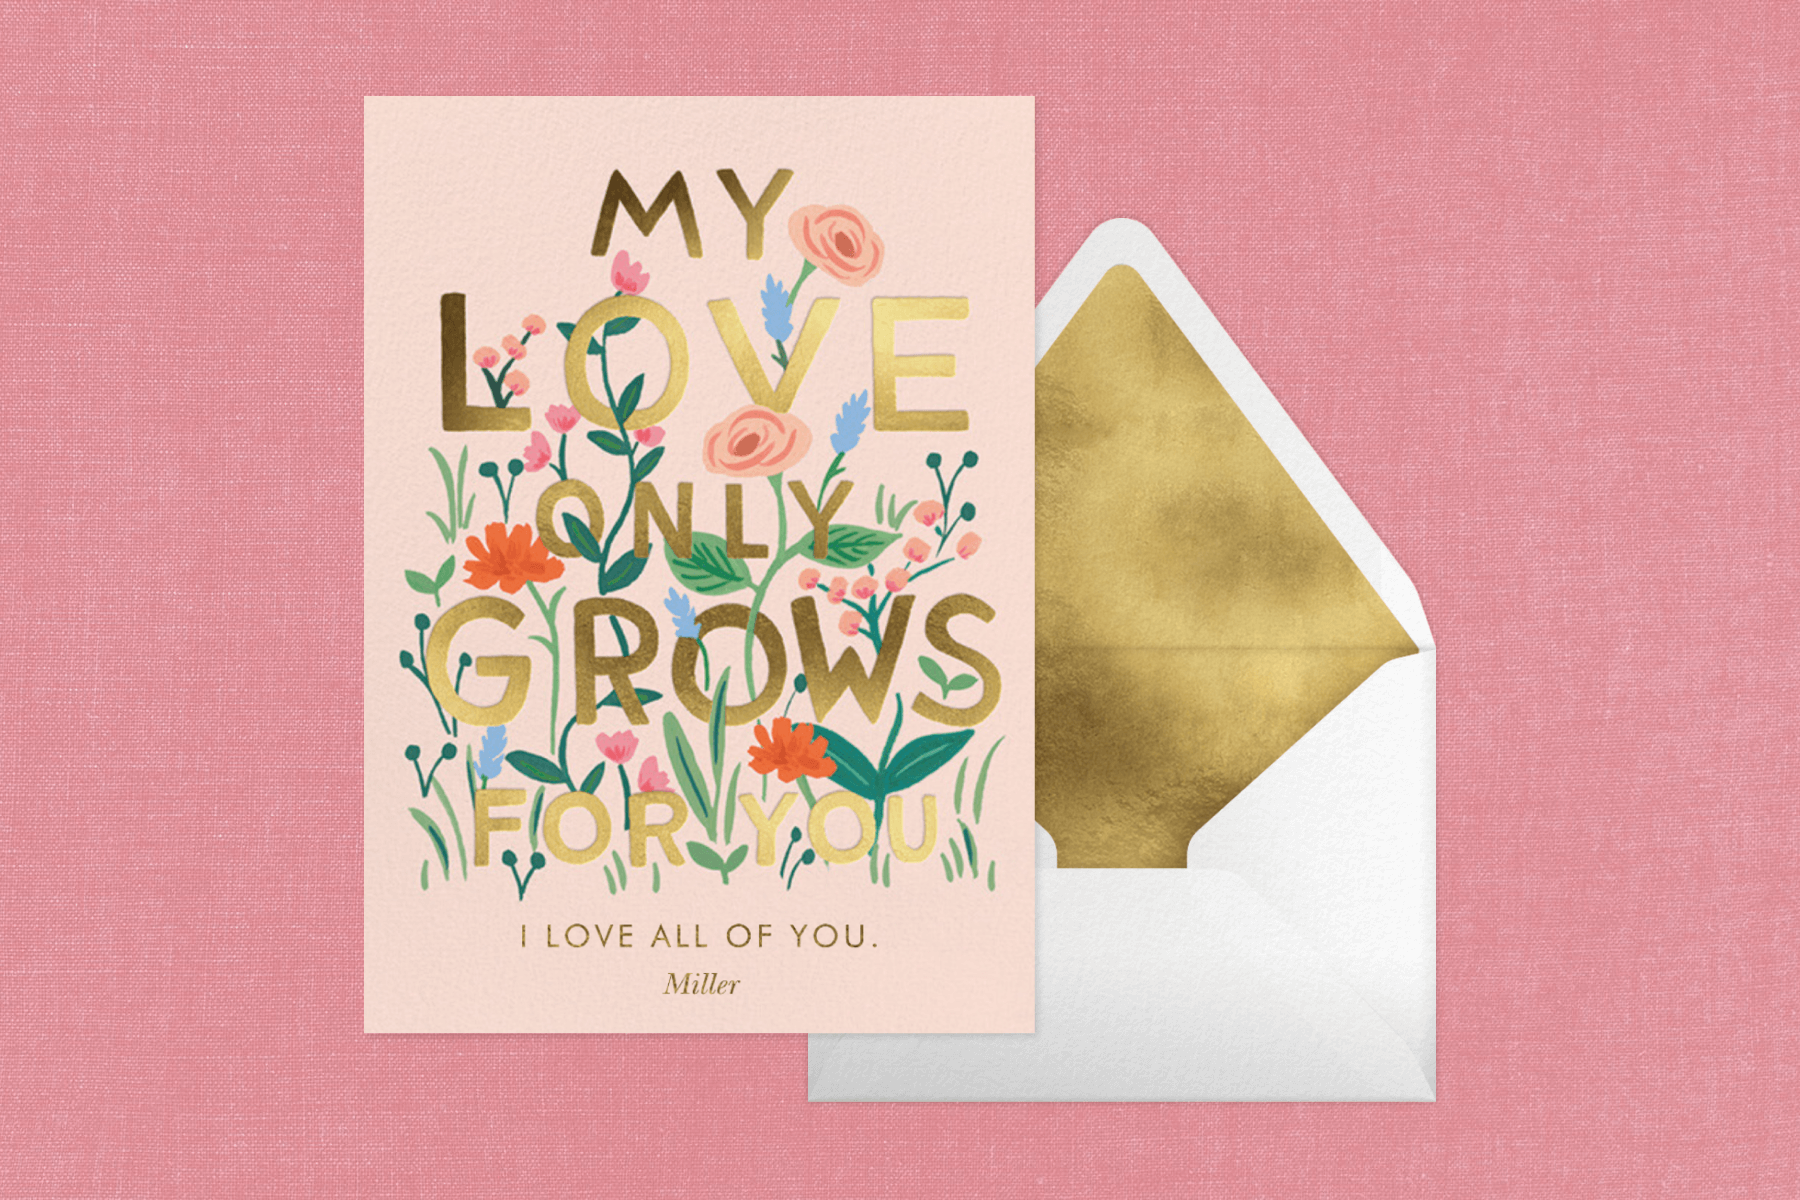 A pink card says ‘My love only grows for you’ with flowers growing from the bottom.